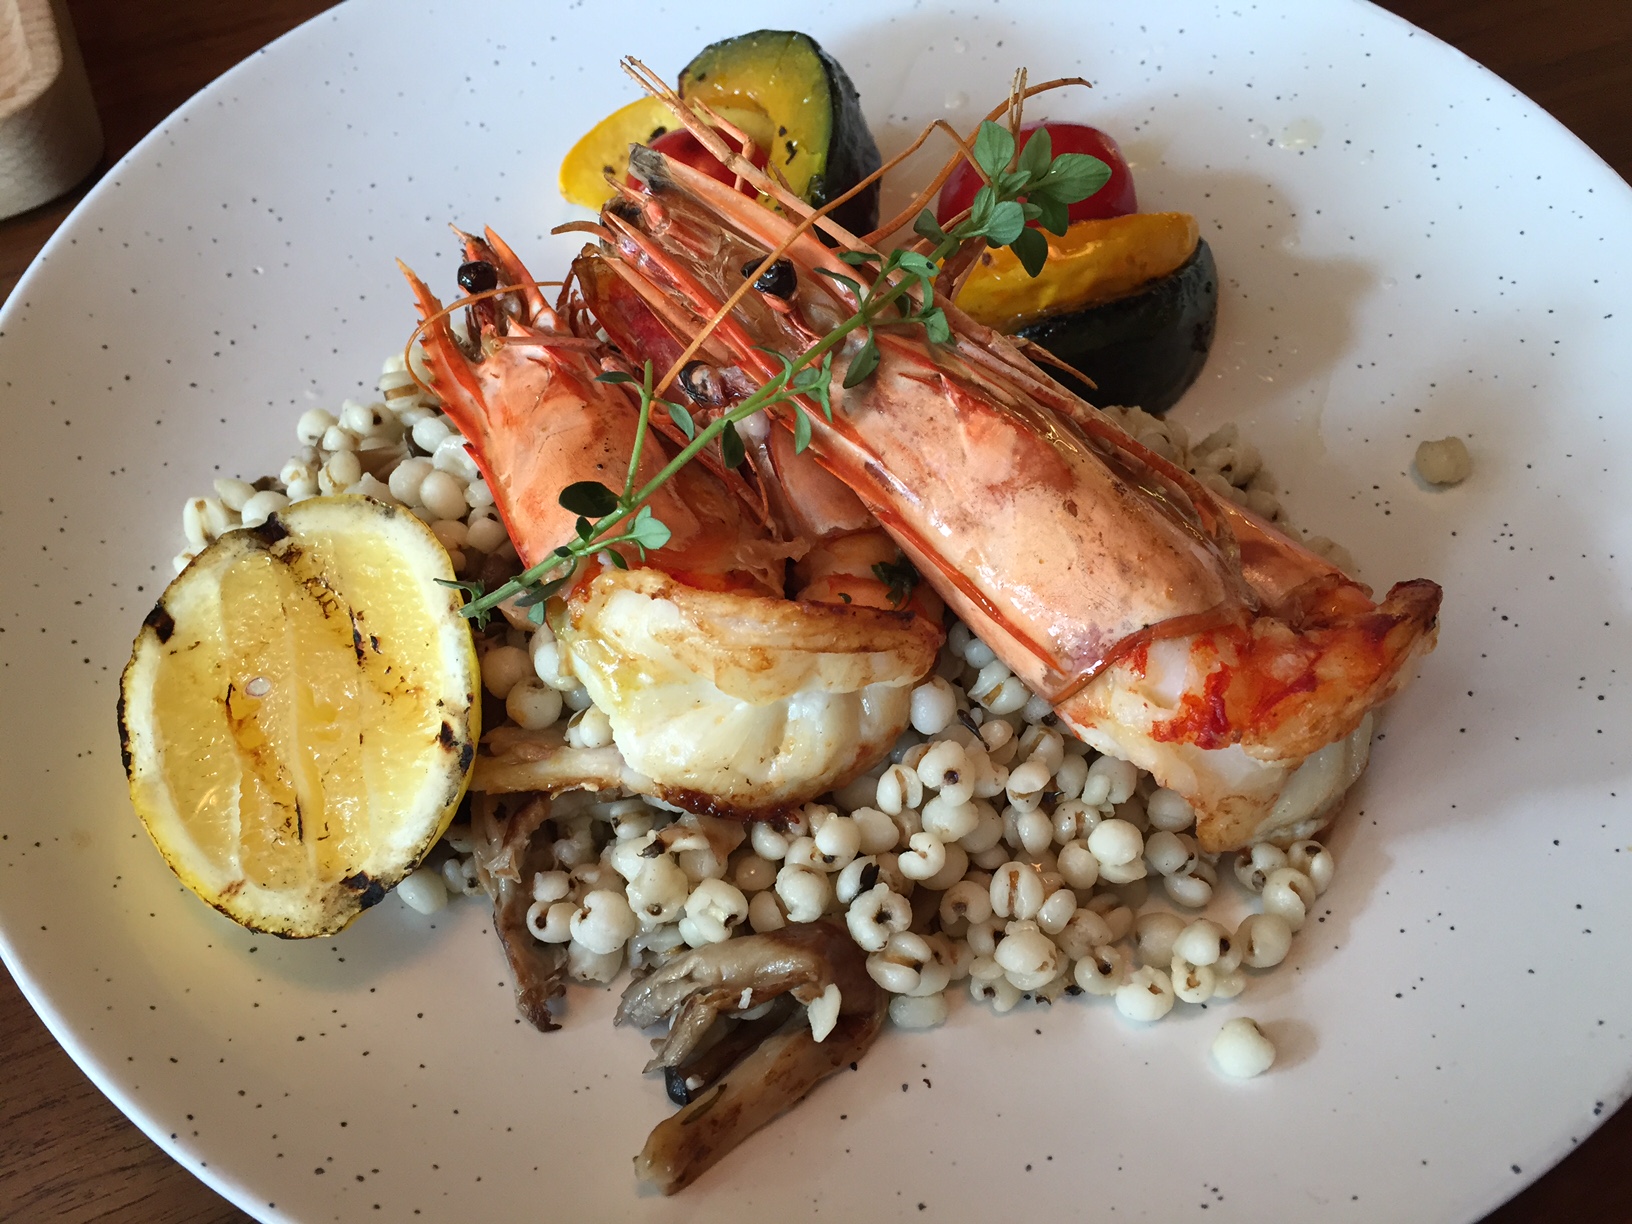 Tribe Lido Brings Out New Summer Lunch Dishes, Adds Delicious Grilled Prawns and Harissa Chicken Grain Bowl